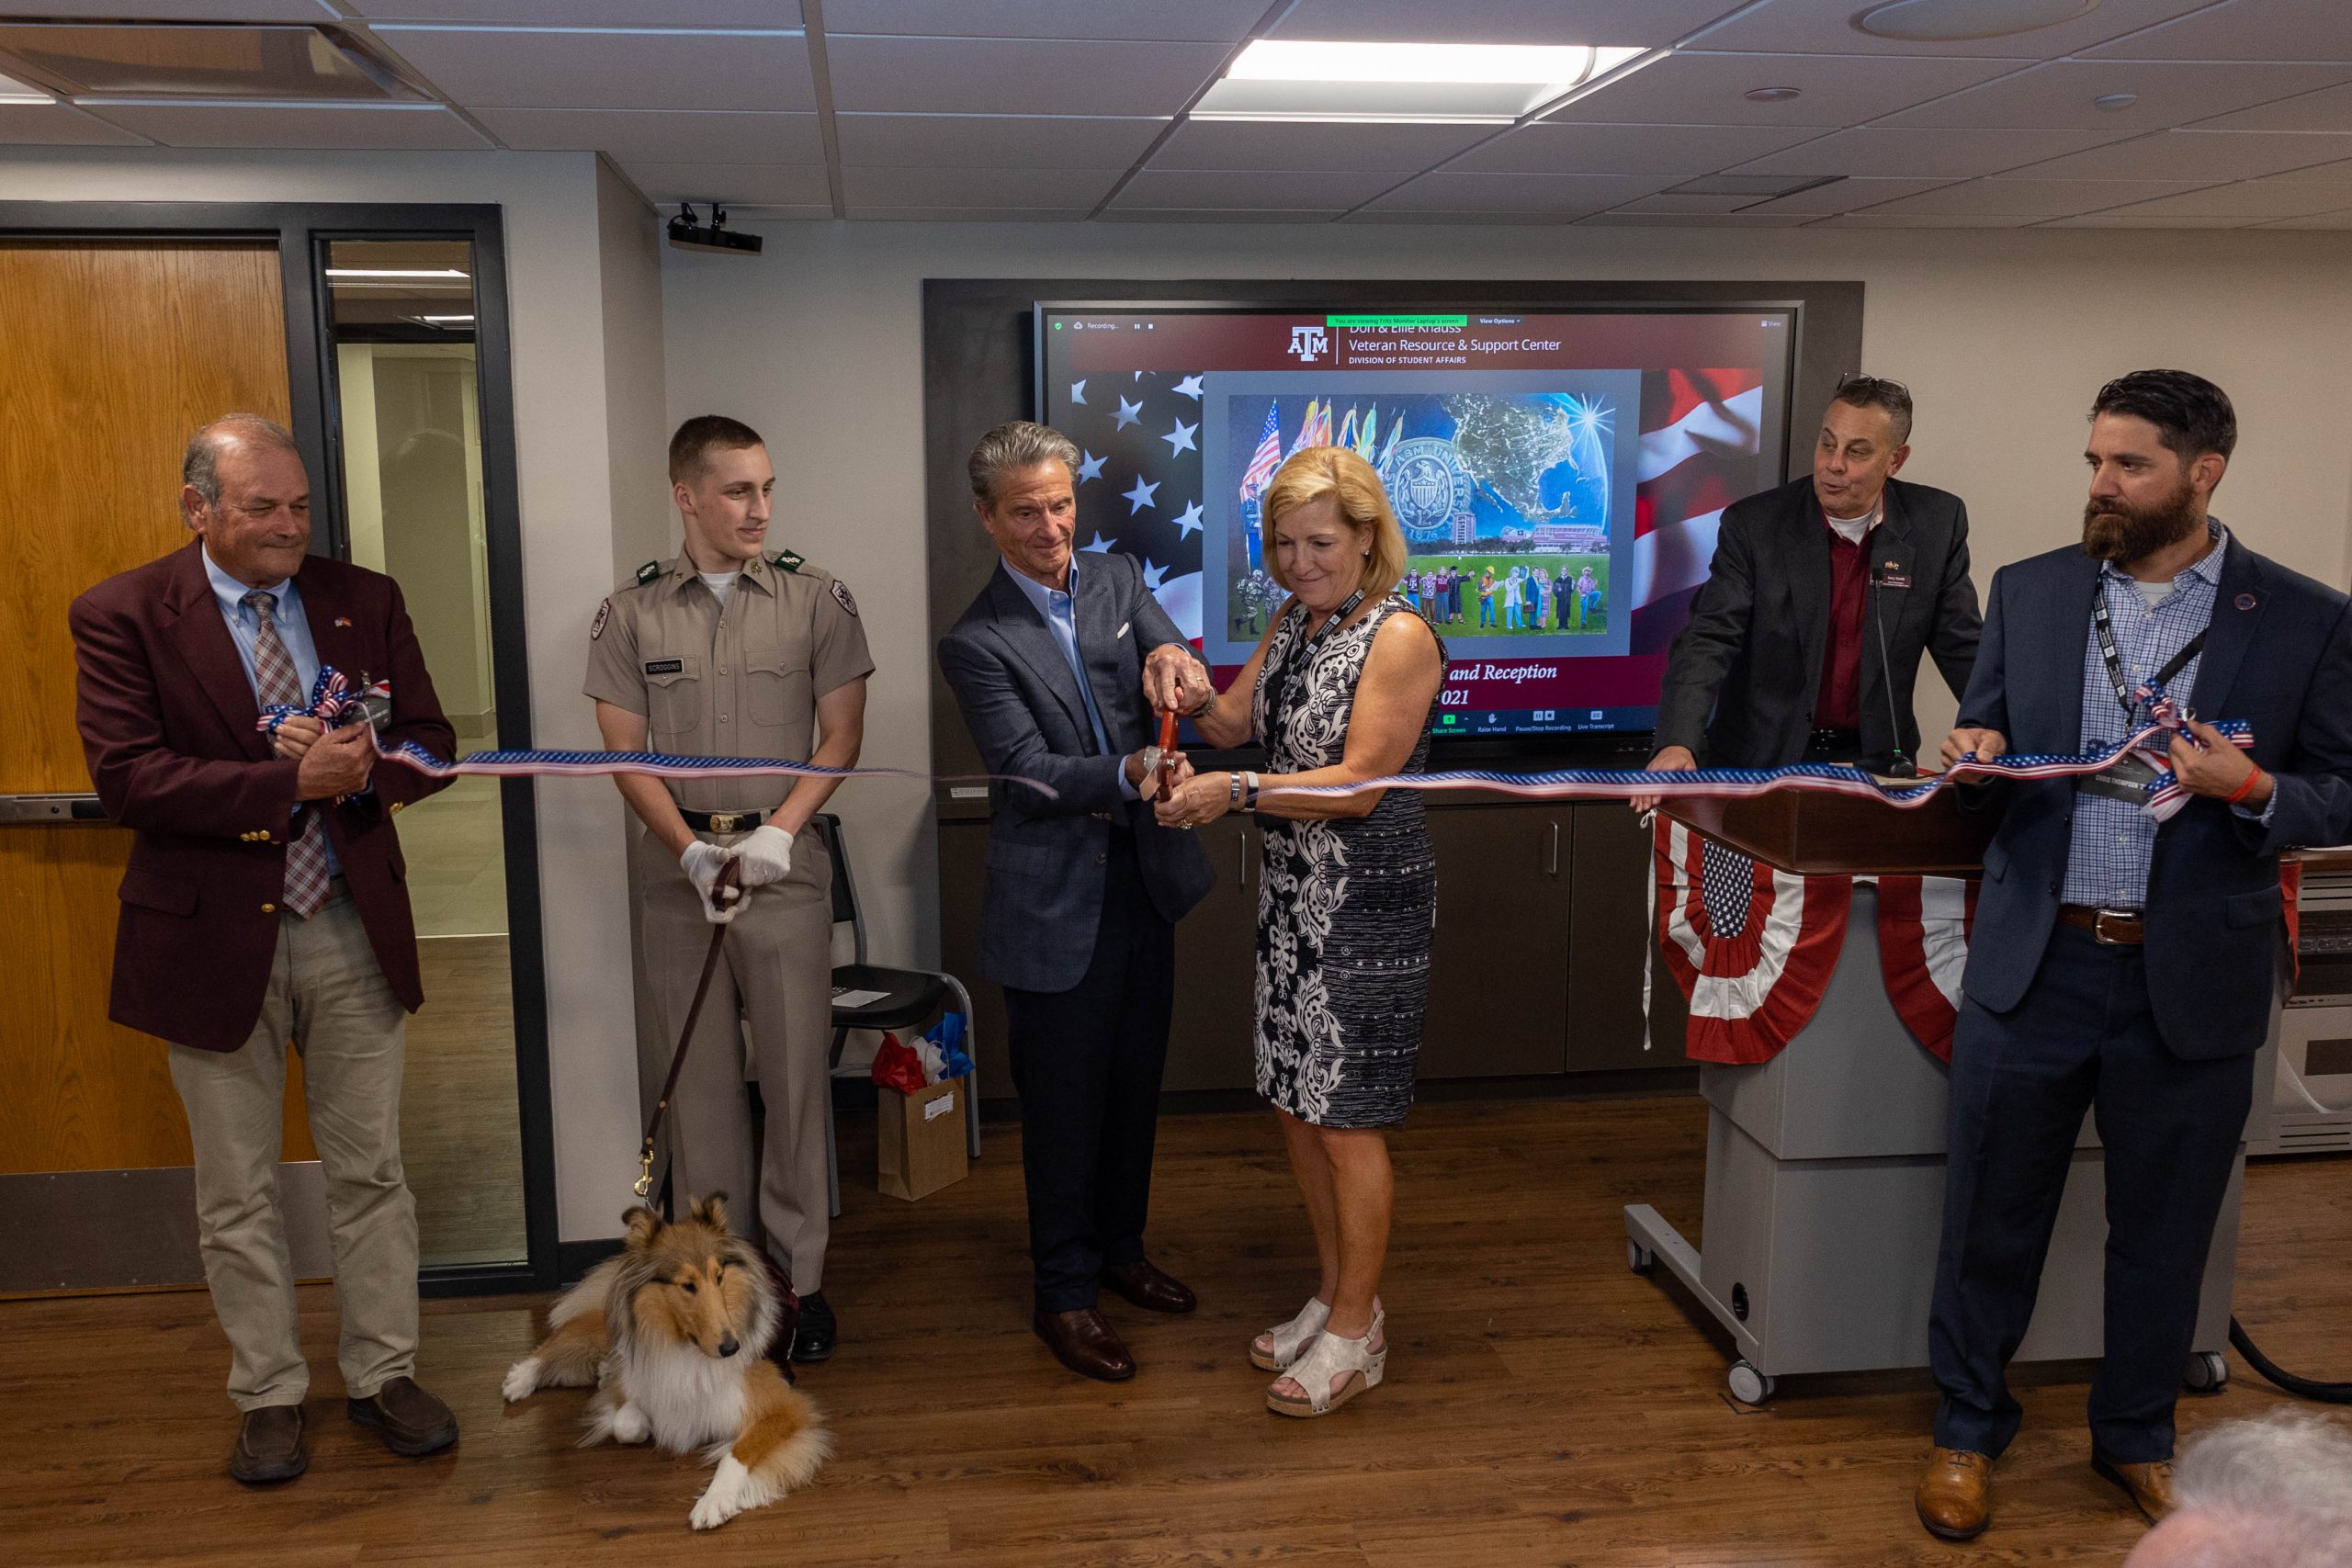 Ribbon cutting at VRSC grand opening in their new suite in the MSC